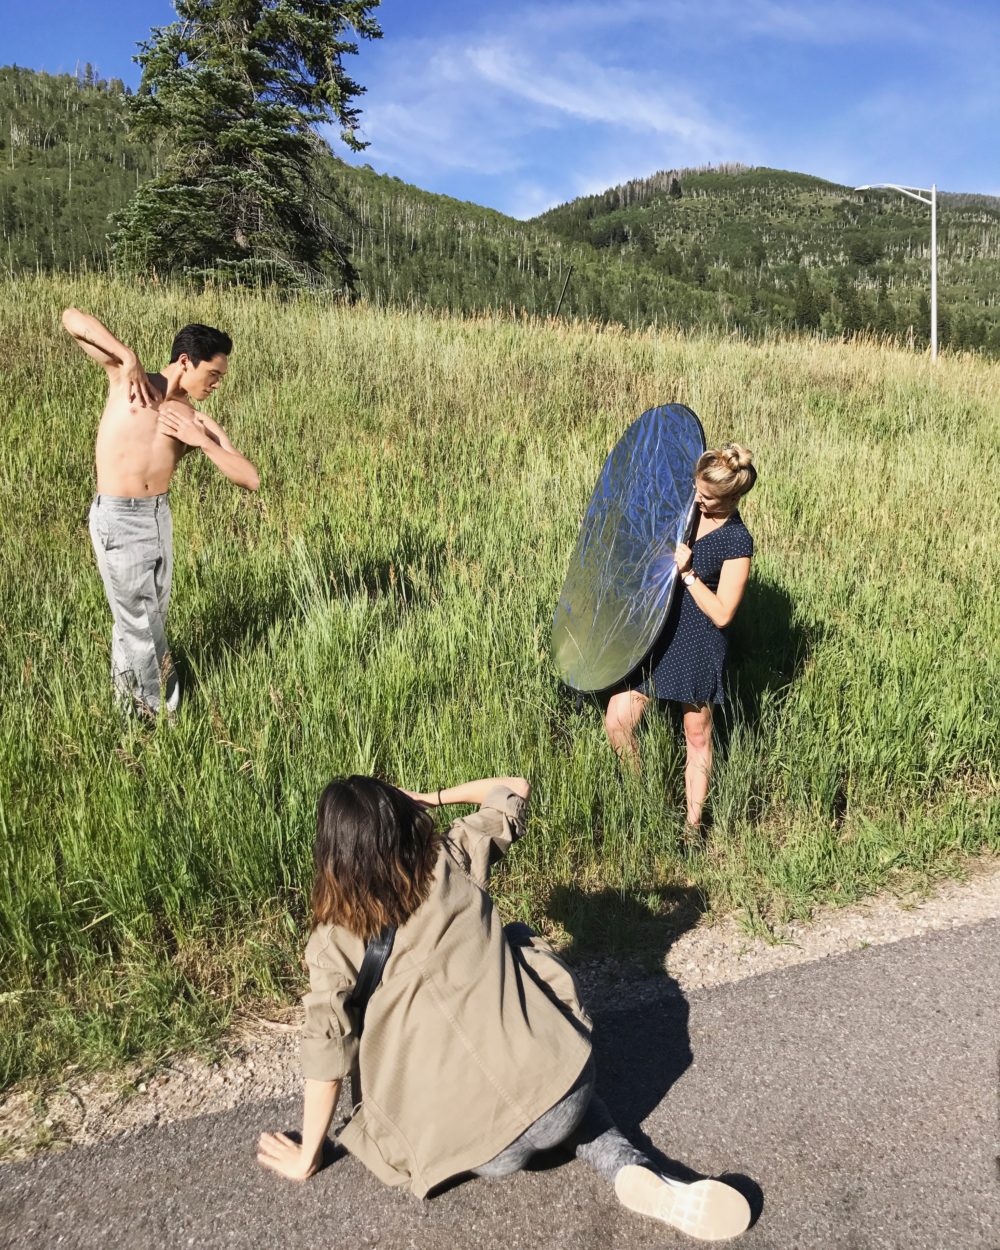 jeffrey Cirio (with photographer Erin Baiano and Kirsten Evans holding the reflector)